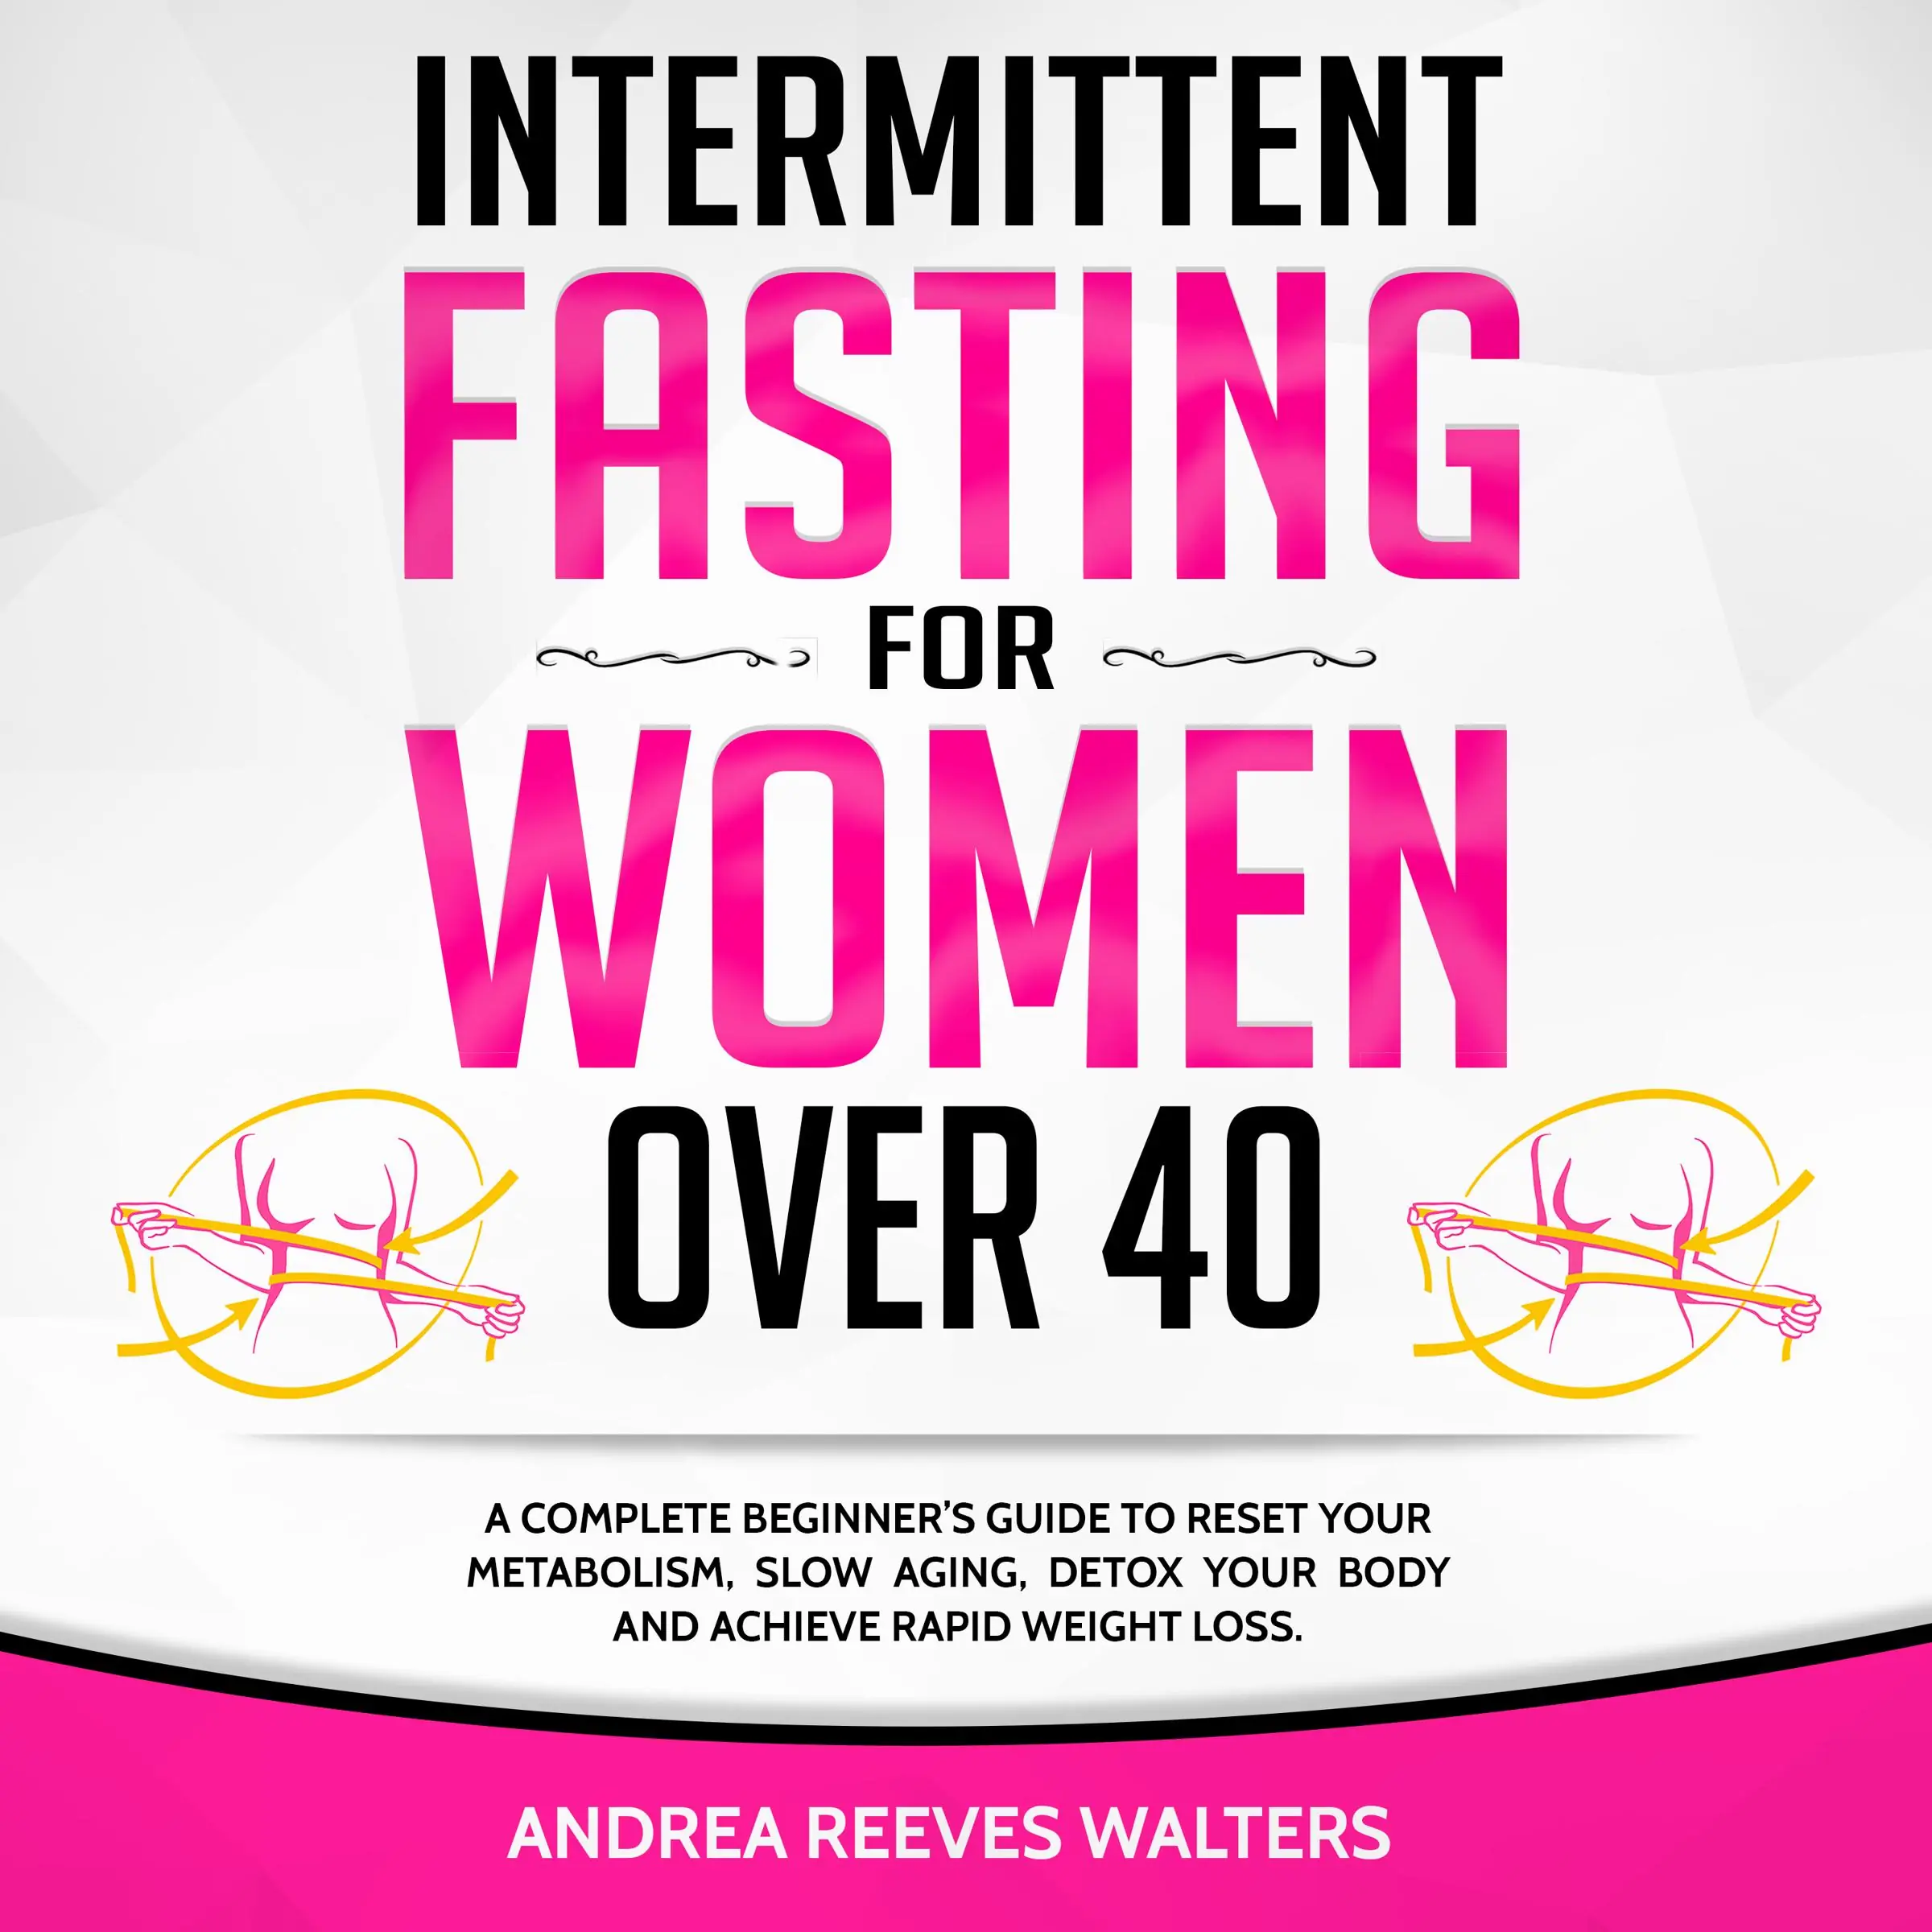 Intermittent Fasting for Women Over 40 by Andrea Reeves Walters